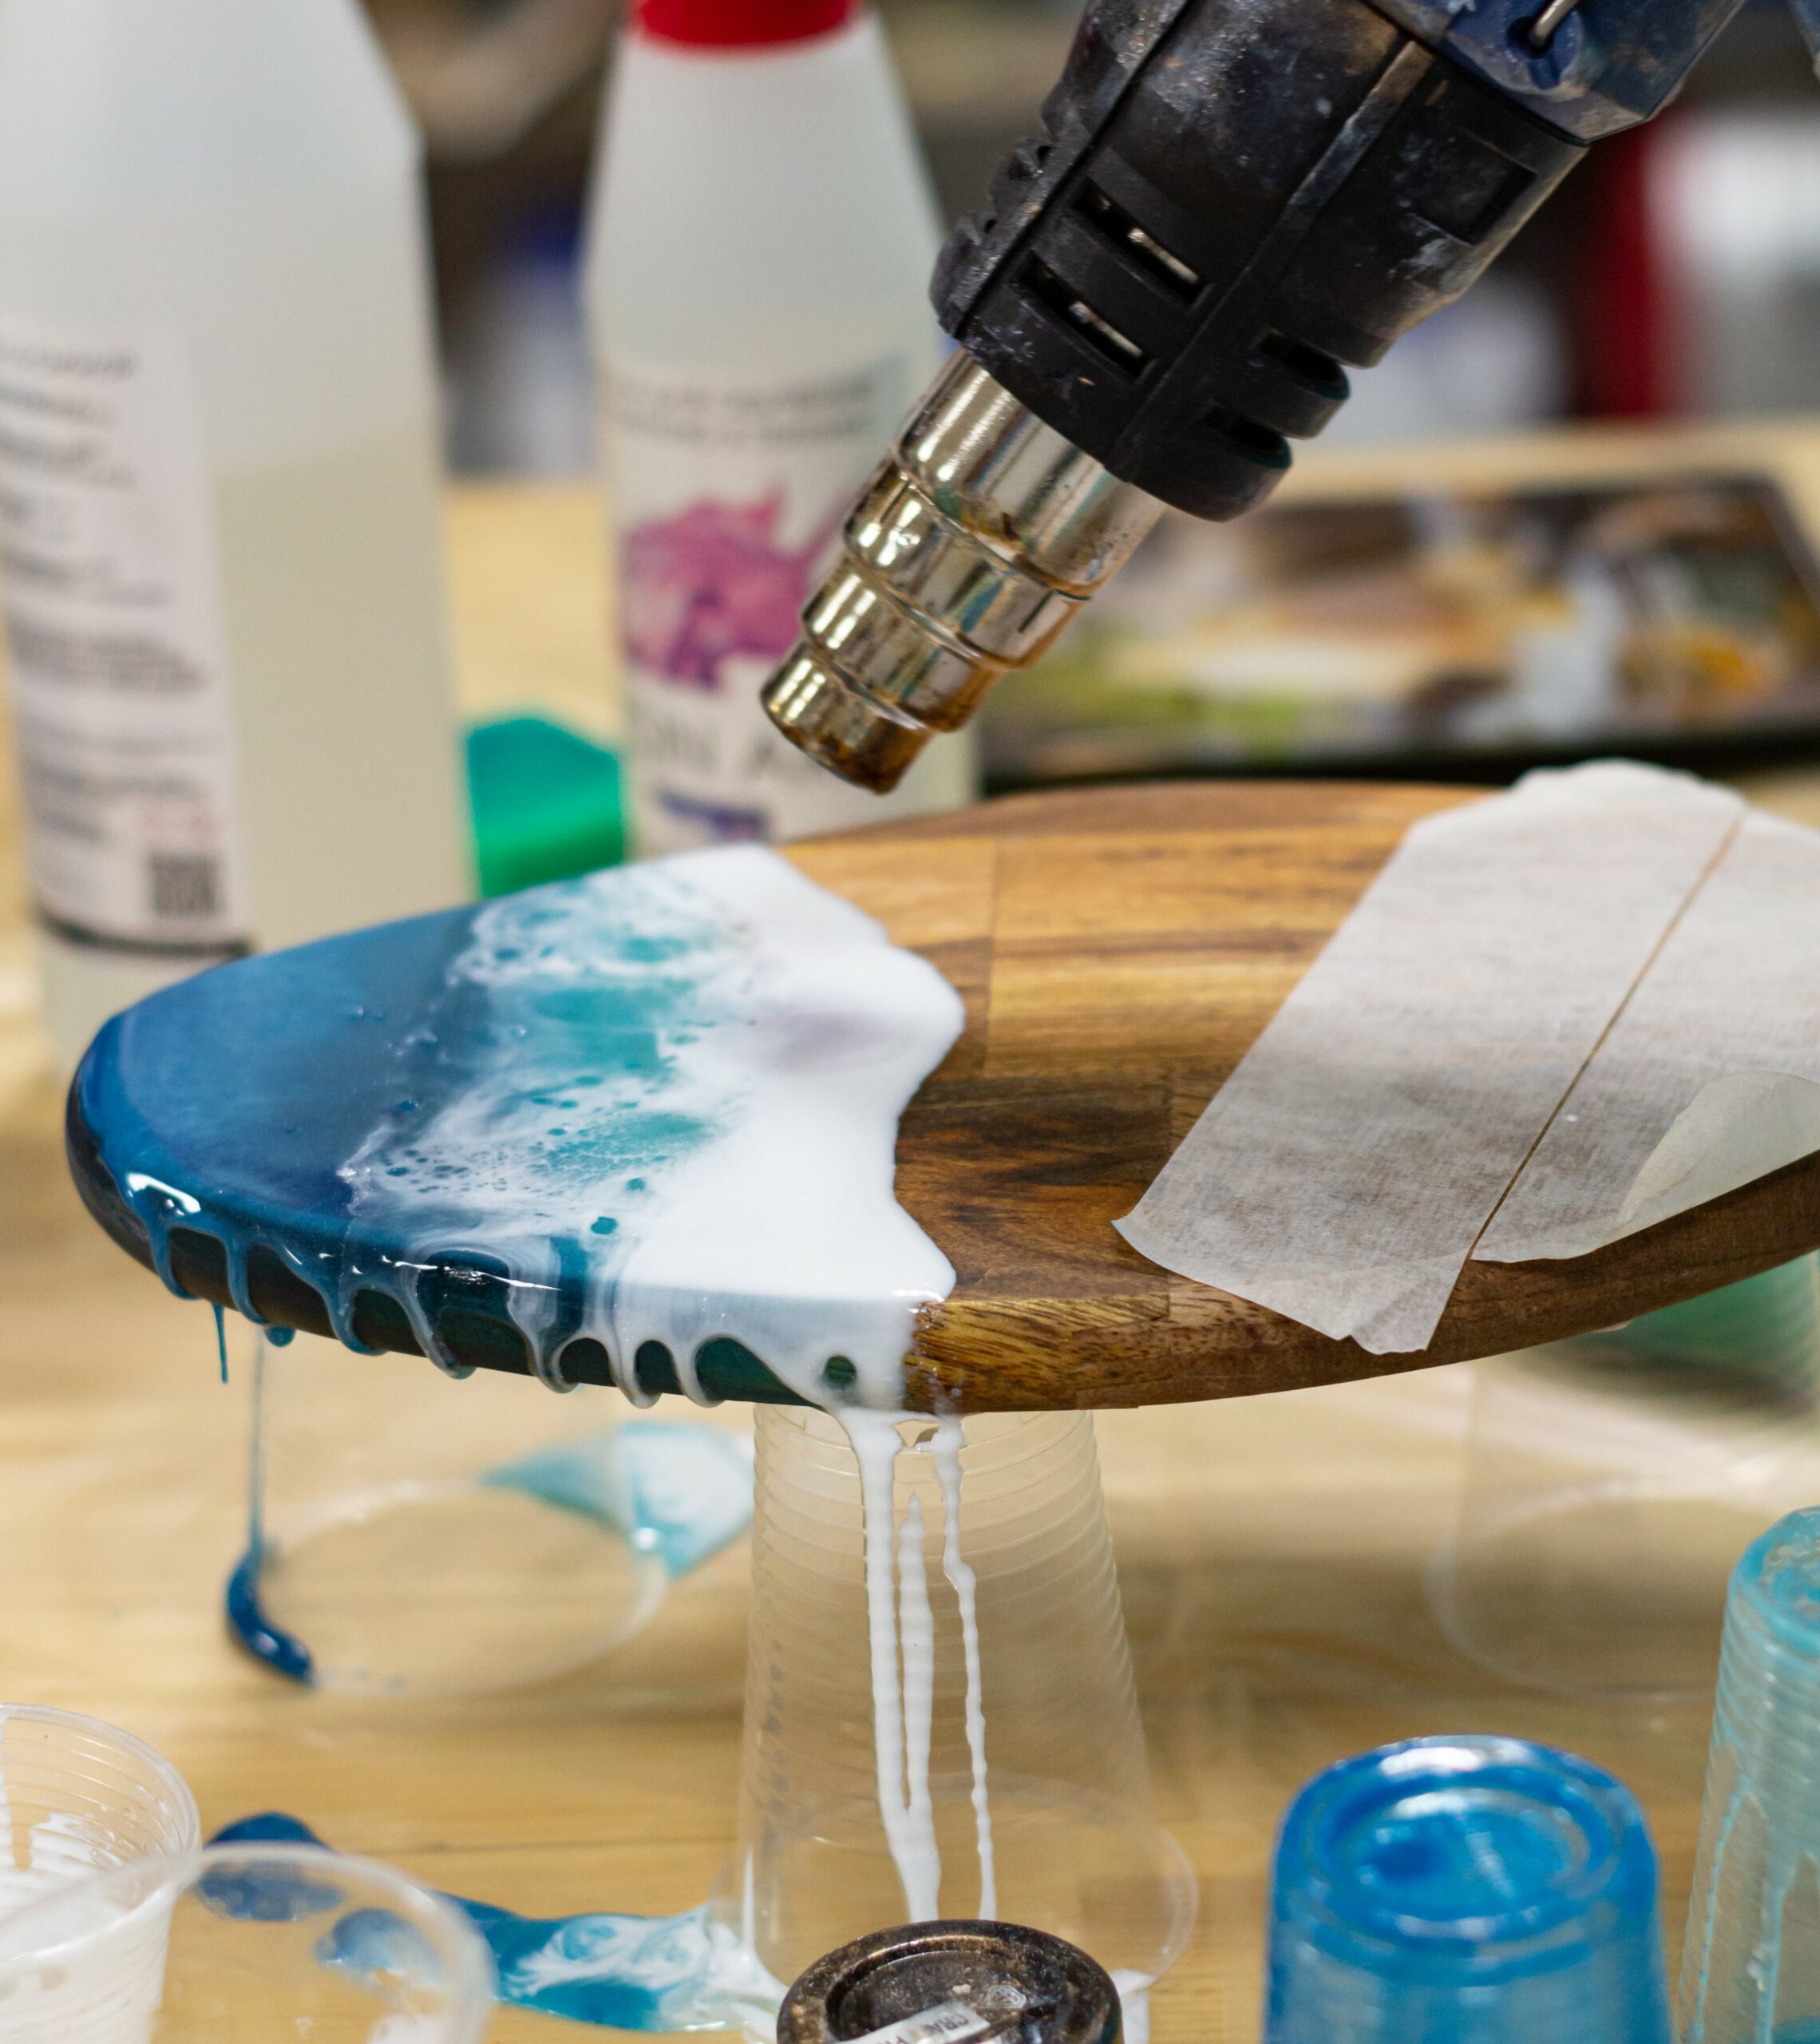 Epoxy Resin Crafts: Cool Projects For a Home Makeover » The Denver Housewife